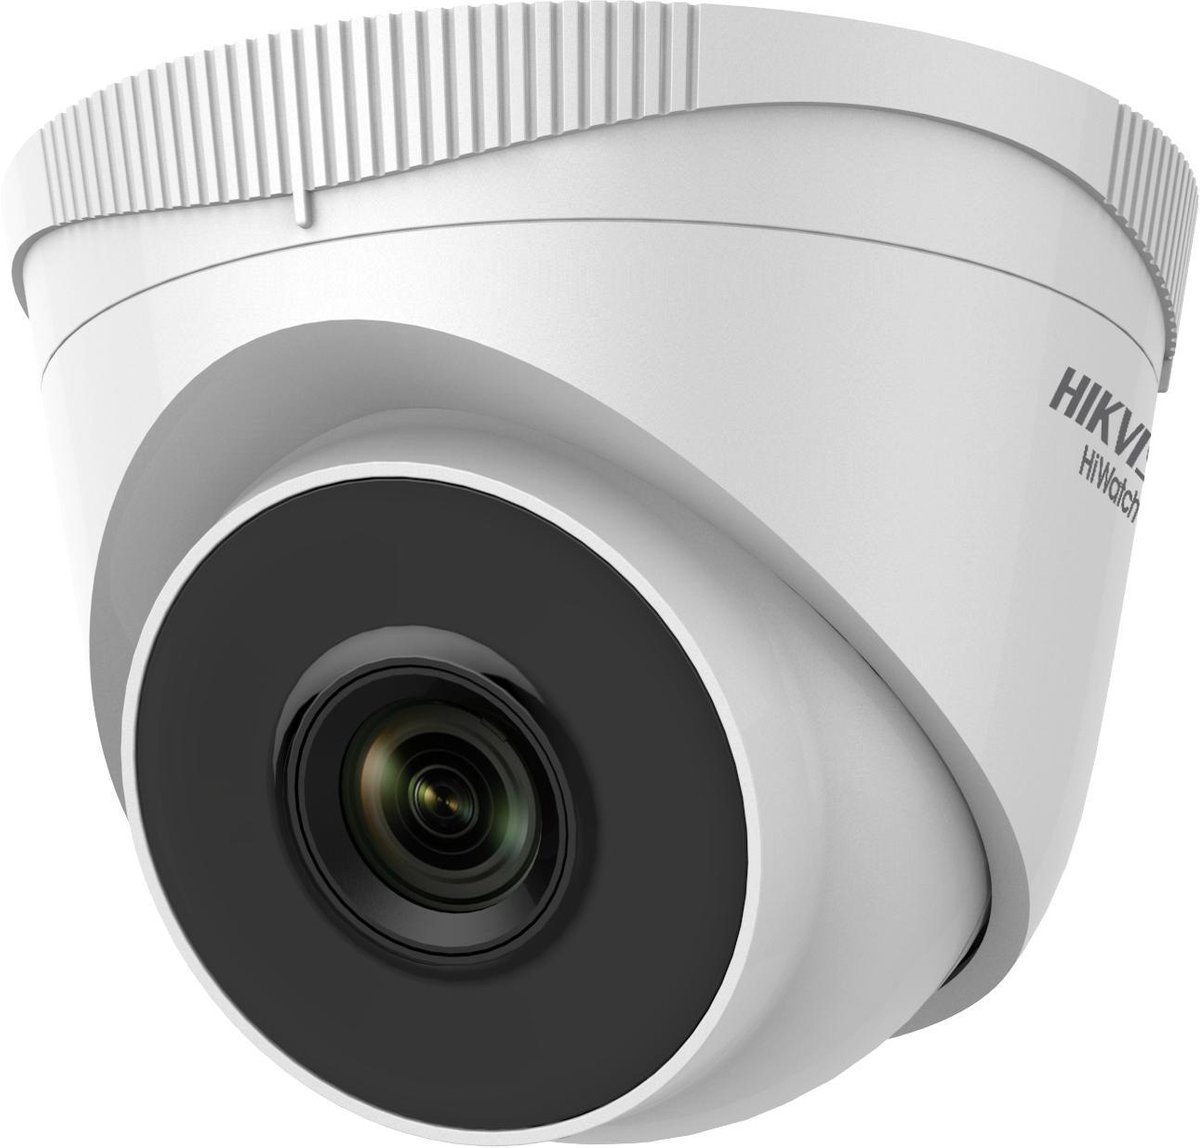 Hikvision HiWatch eyeball - T220H - Hikvision